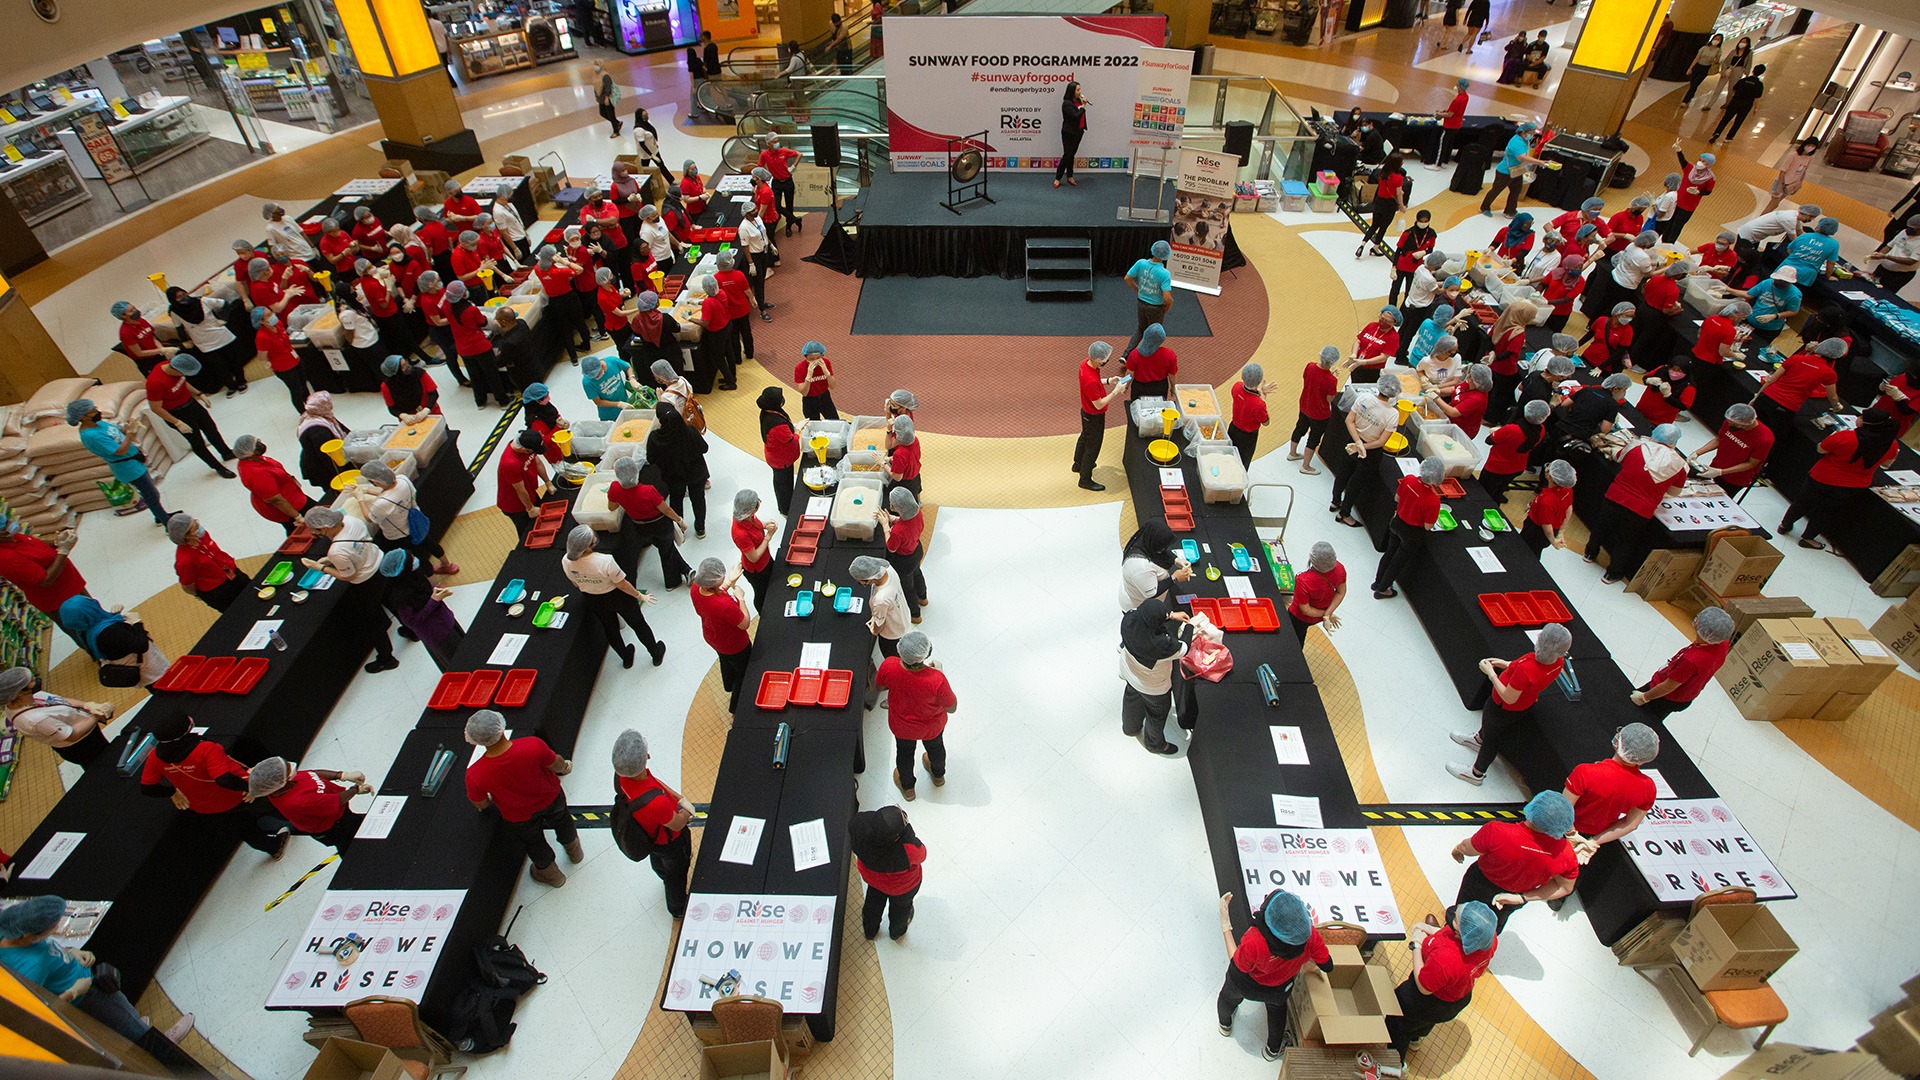 Sunway Reaffirms Commitment to Zero Hunger